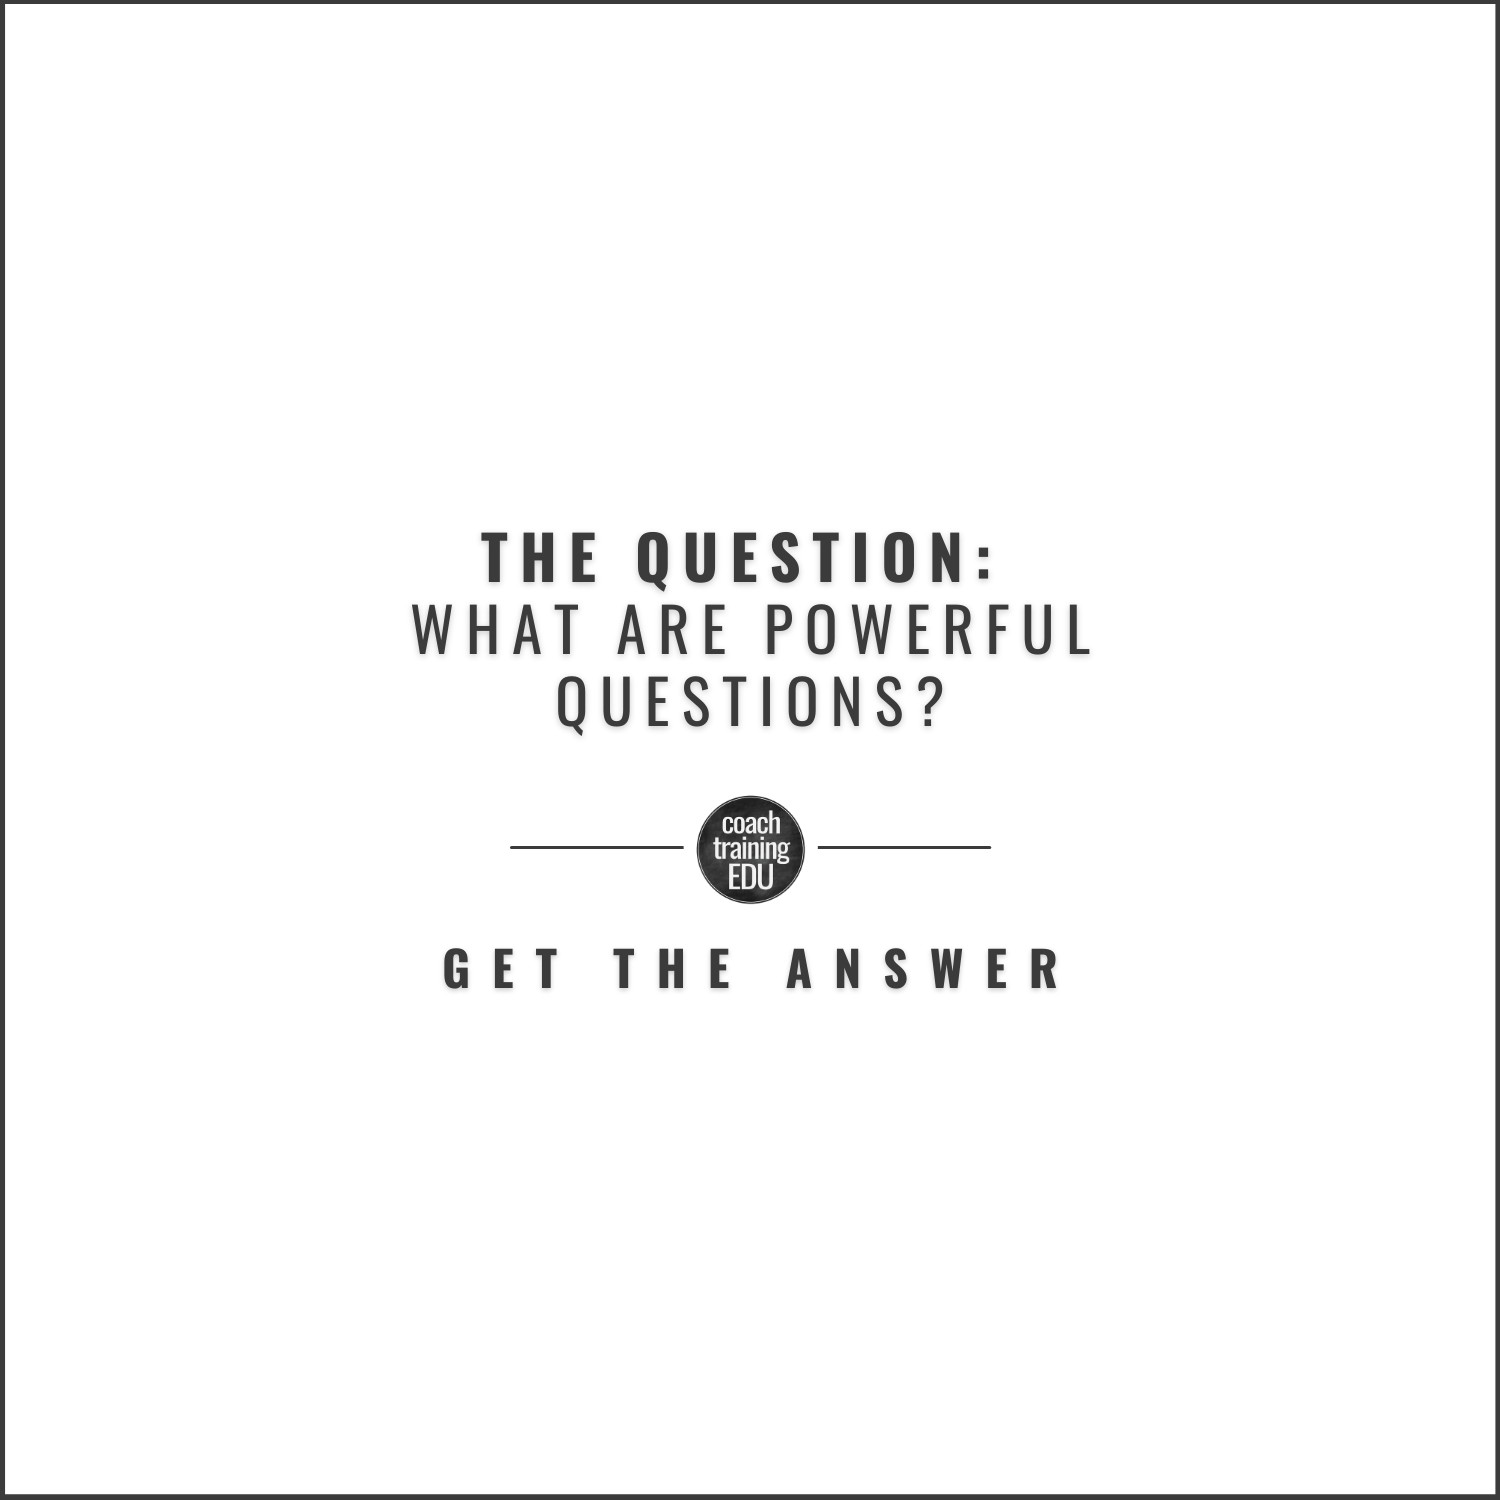 What are powerful questions? 